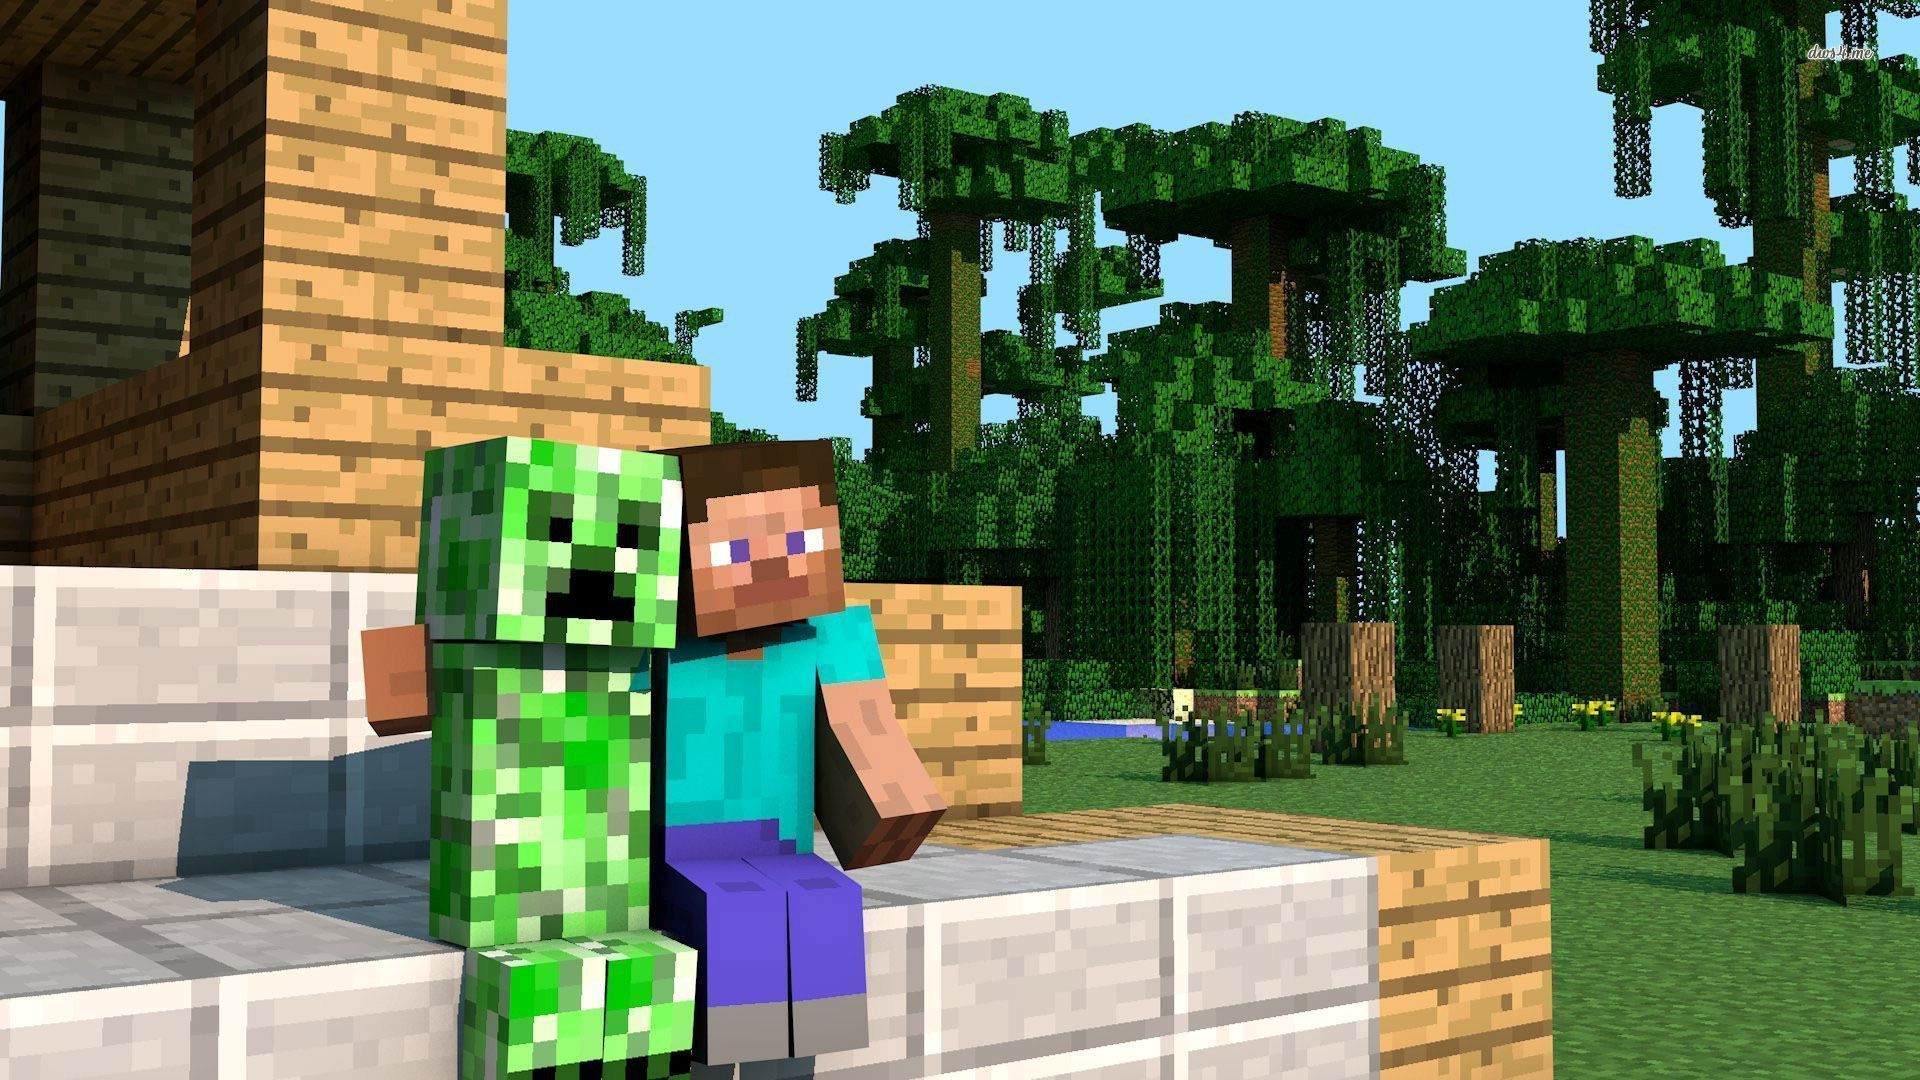 Creeper - Minecraft wallpaper - Game wallpapers